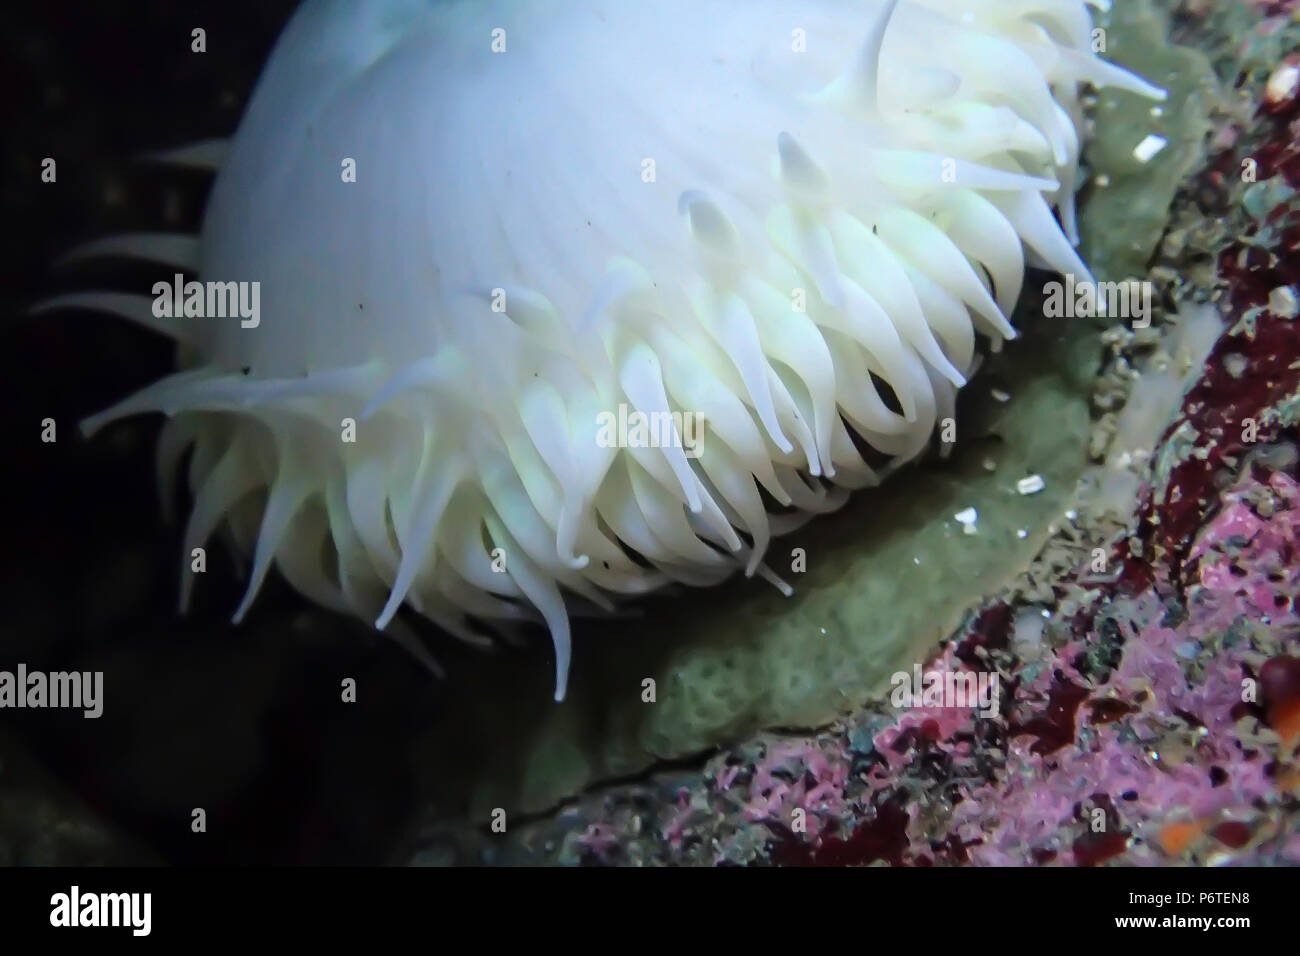 Giant Green Anemone, Anthopleura xanthogrammica, lacking algae in a dark microhabitat so it appears white, at Point of Arches along the Pacific Ocean  Stock Photo